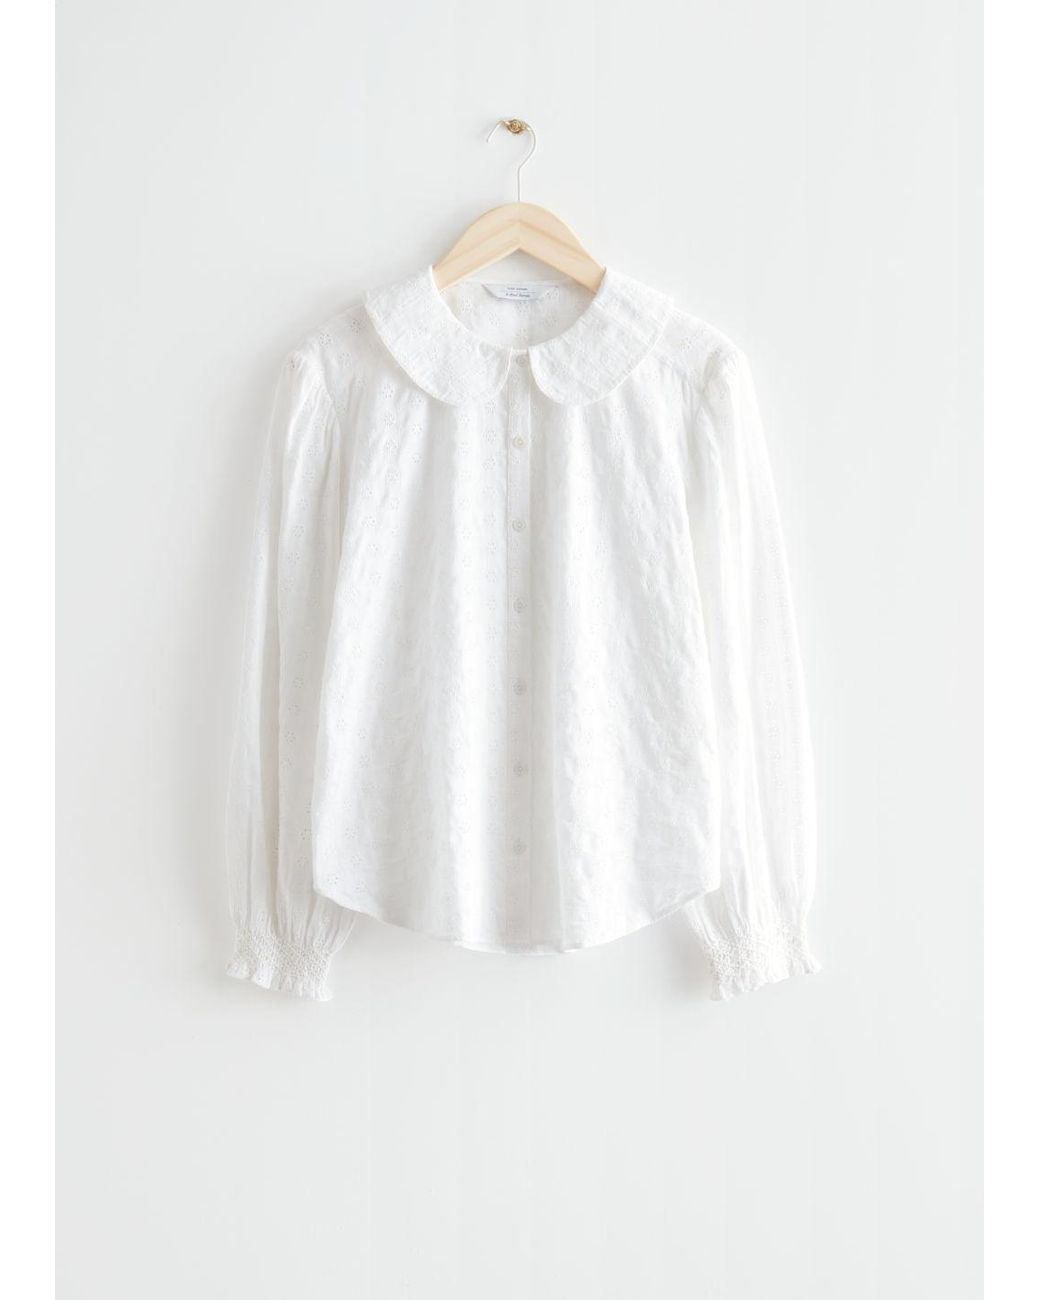 & Other Stories Peter Pan Collar Shirt in White | Lyst